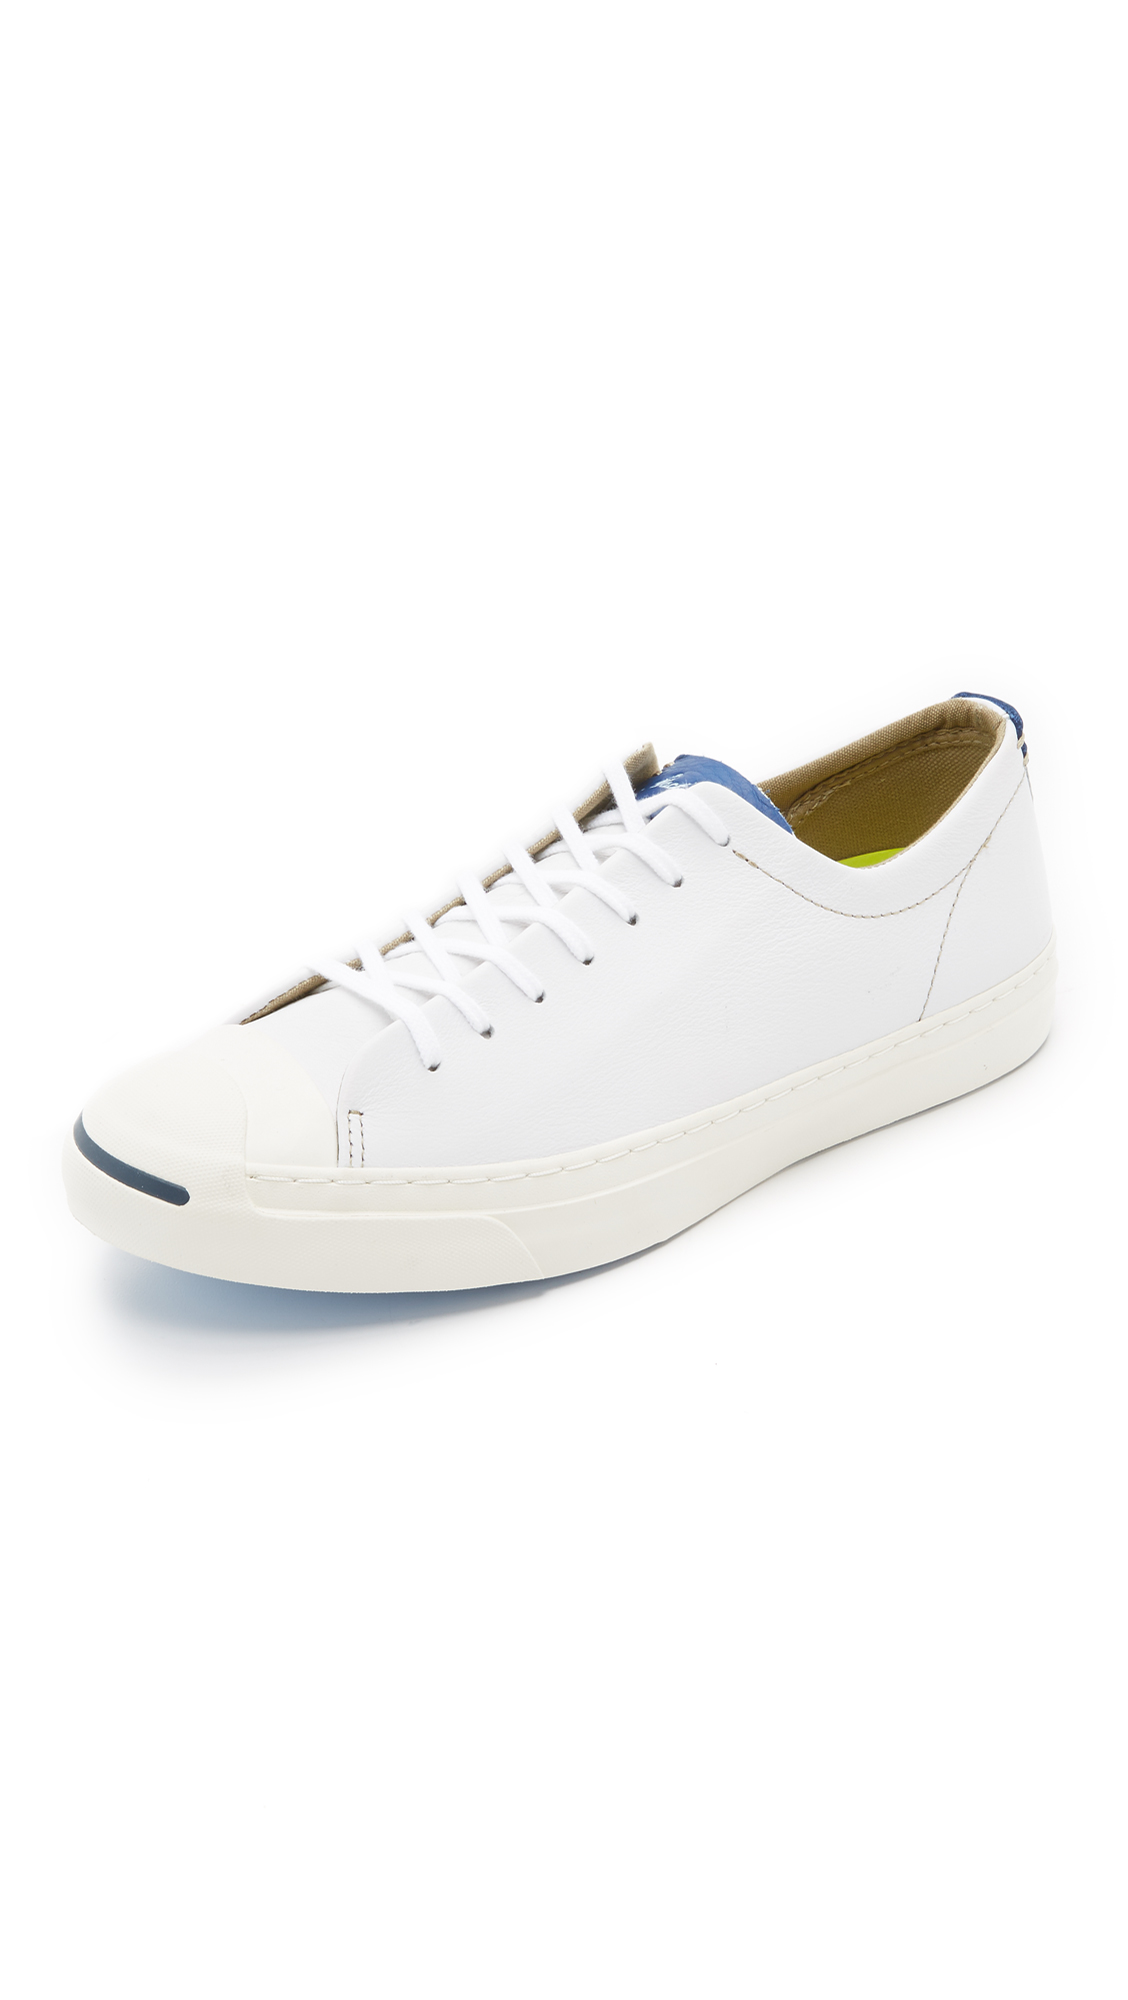 Converse Jack Purcell Jack Tumbled Leather Sneakers In White/egret/road ...